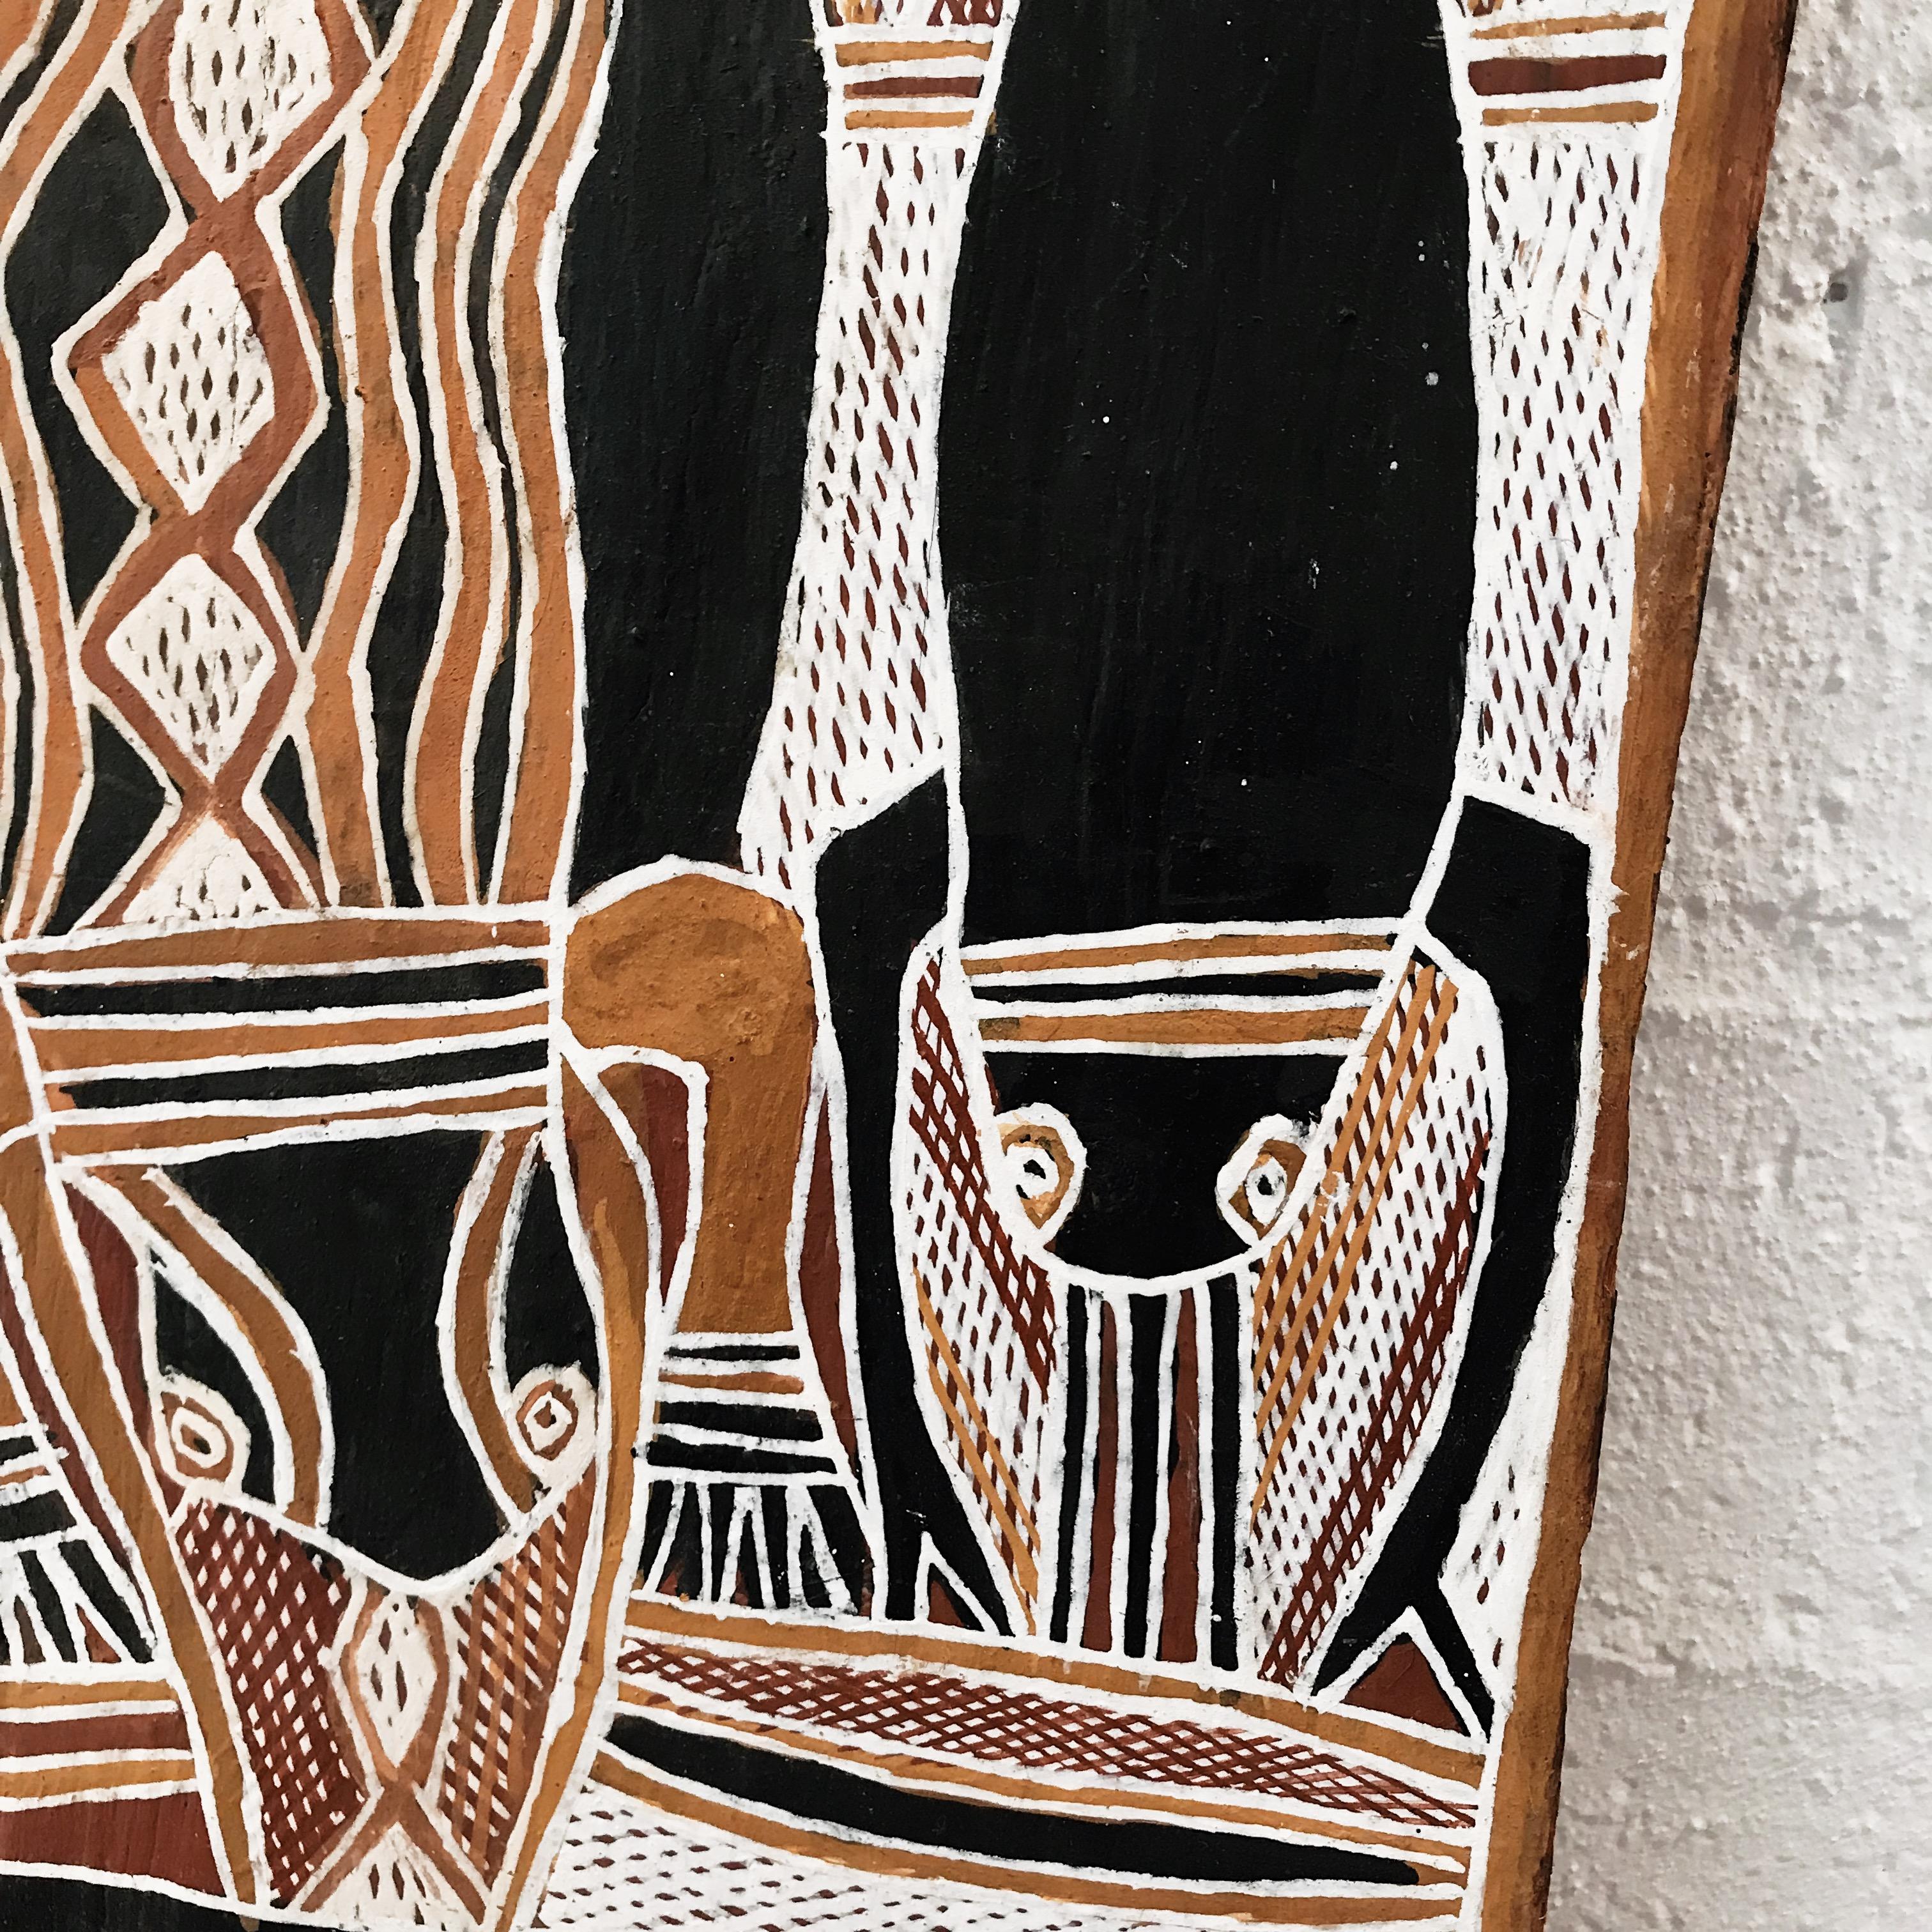 Painted Aboriginal Stream Painting by Bulambi, Natural Earth Pigments on Eucalyptus Bark For Sale